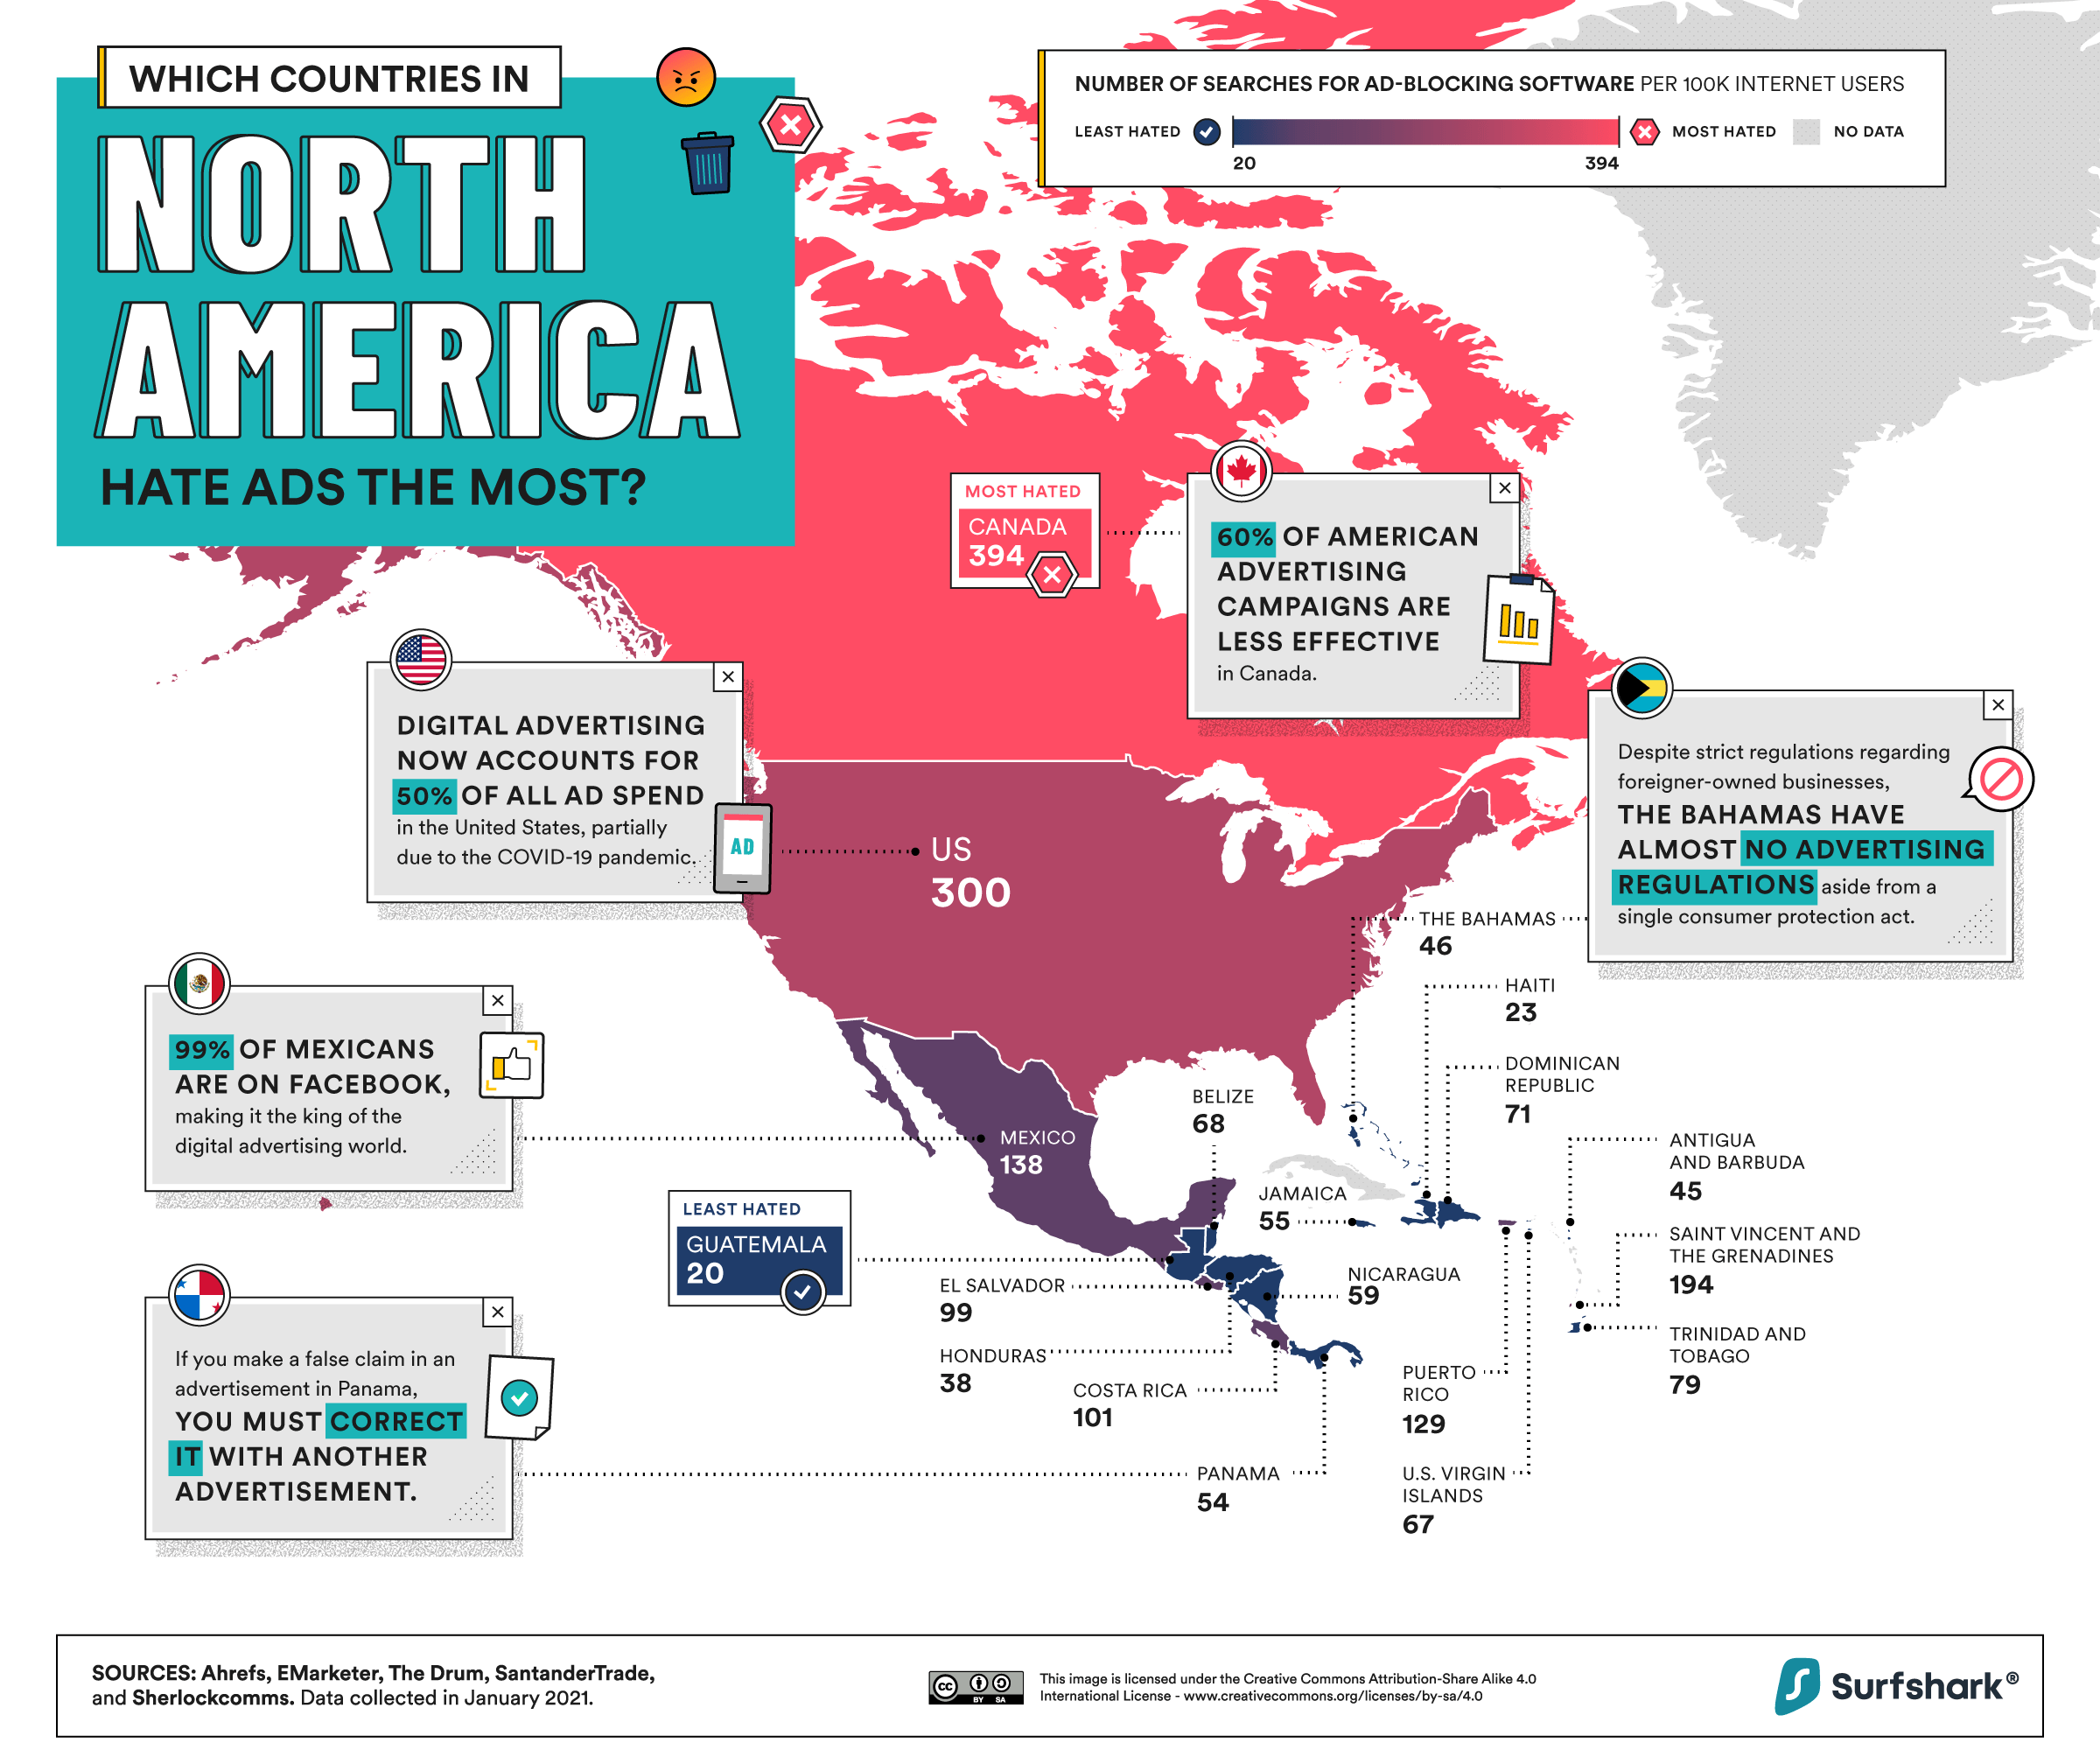 a map that shows which countries in North America made the most searches on Google for ad blocking software